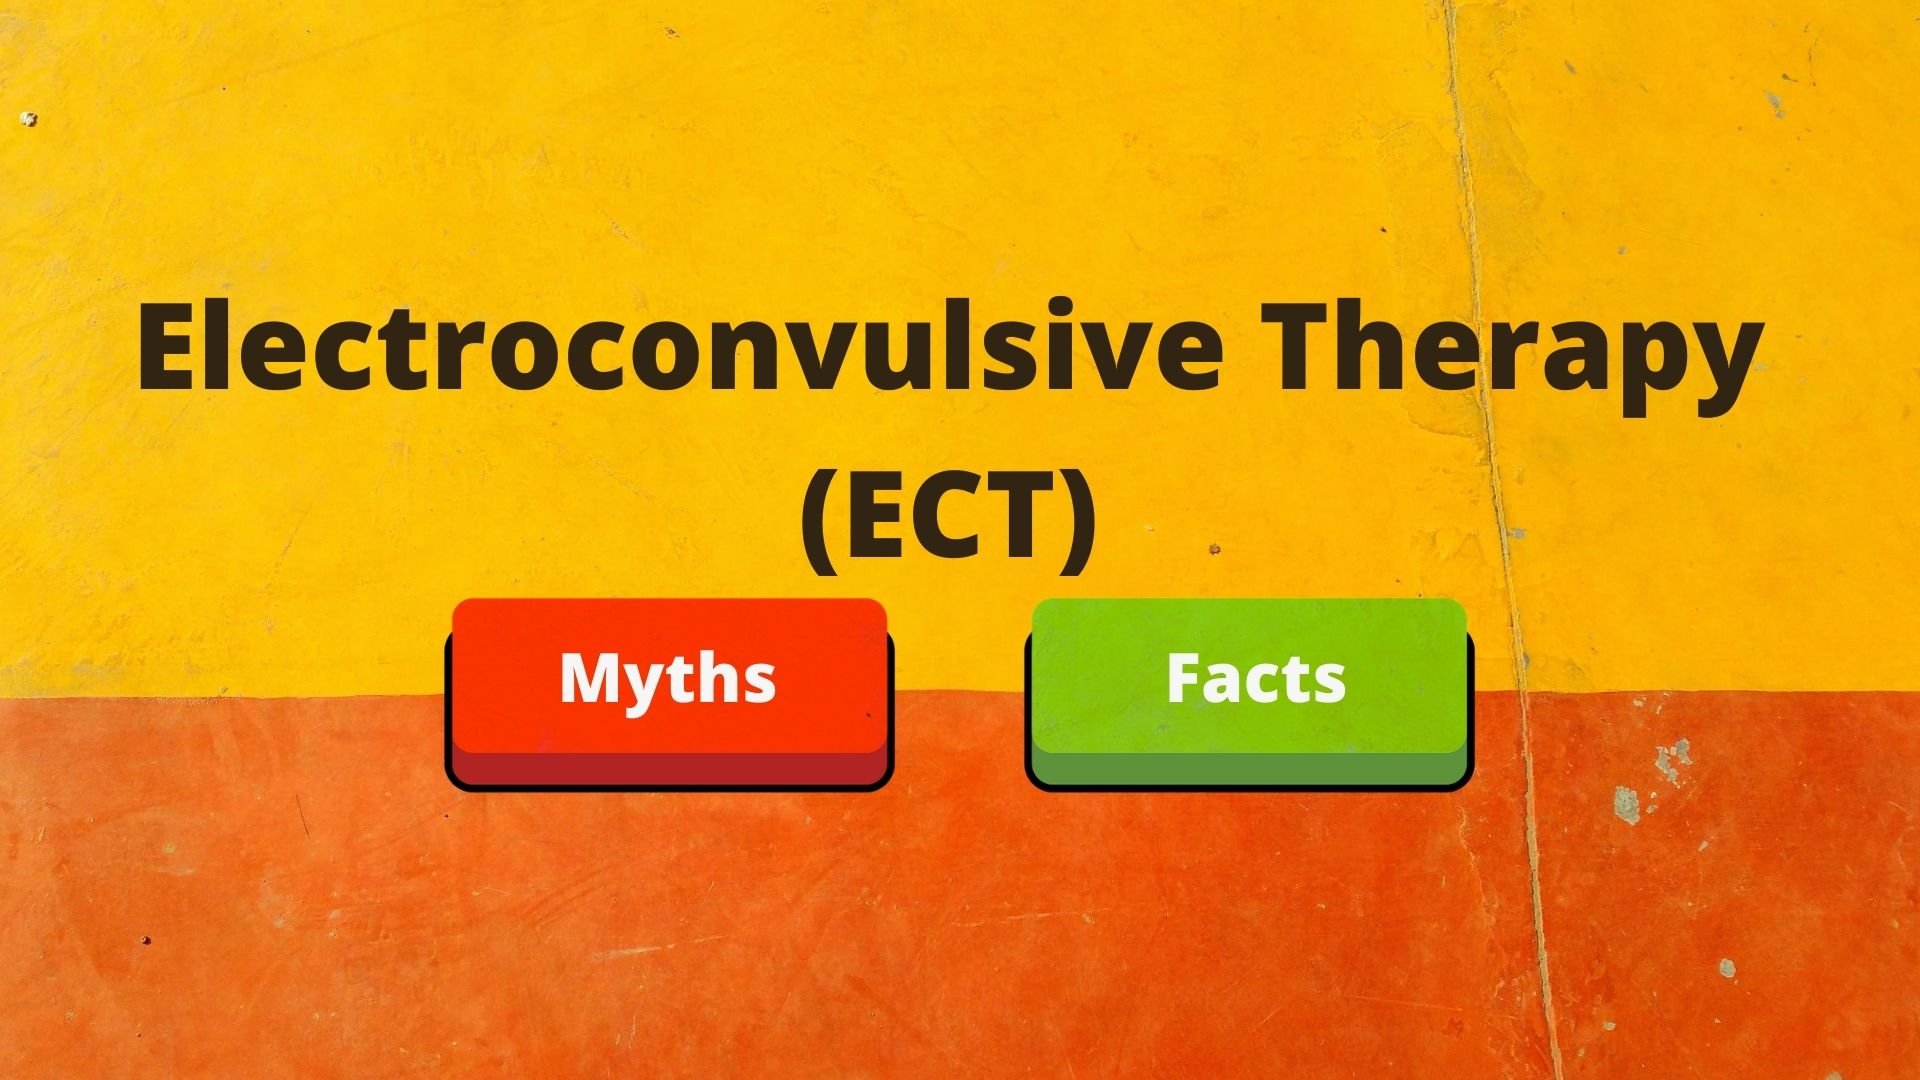 Ect? Electroconvulsive Therapy